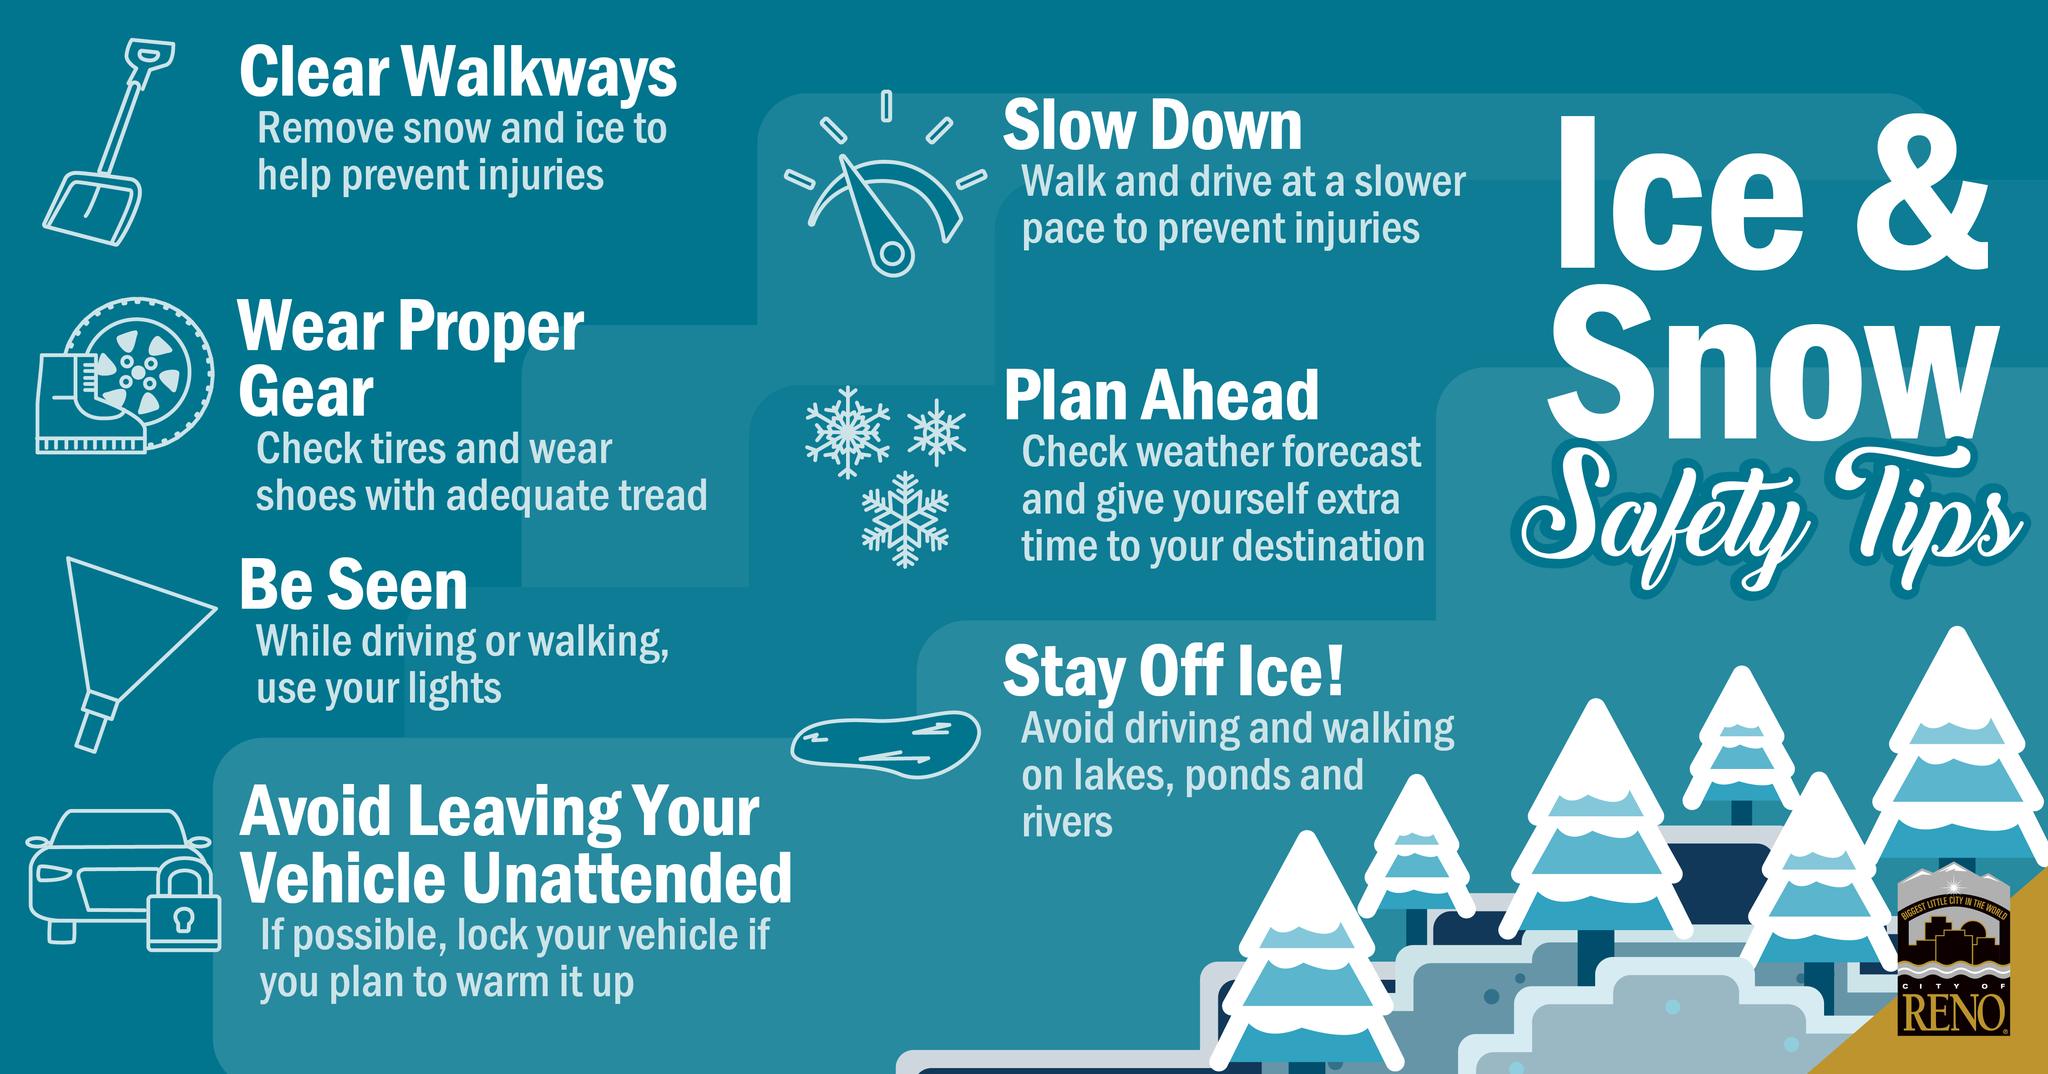 City of Reno on X: Stay safe this winter season with these essential tips!  Don't forget to keep sidewalks clear, stay off of the ice, and make sure  you're visible when out!